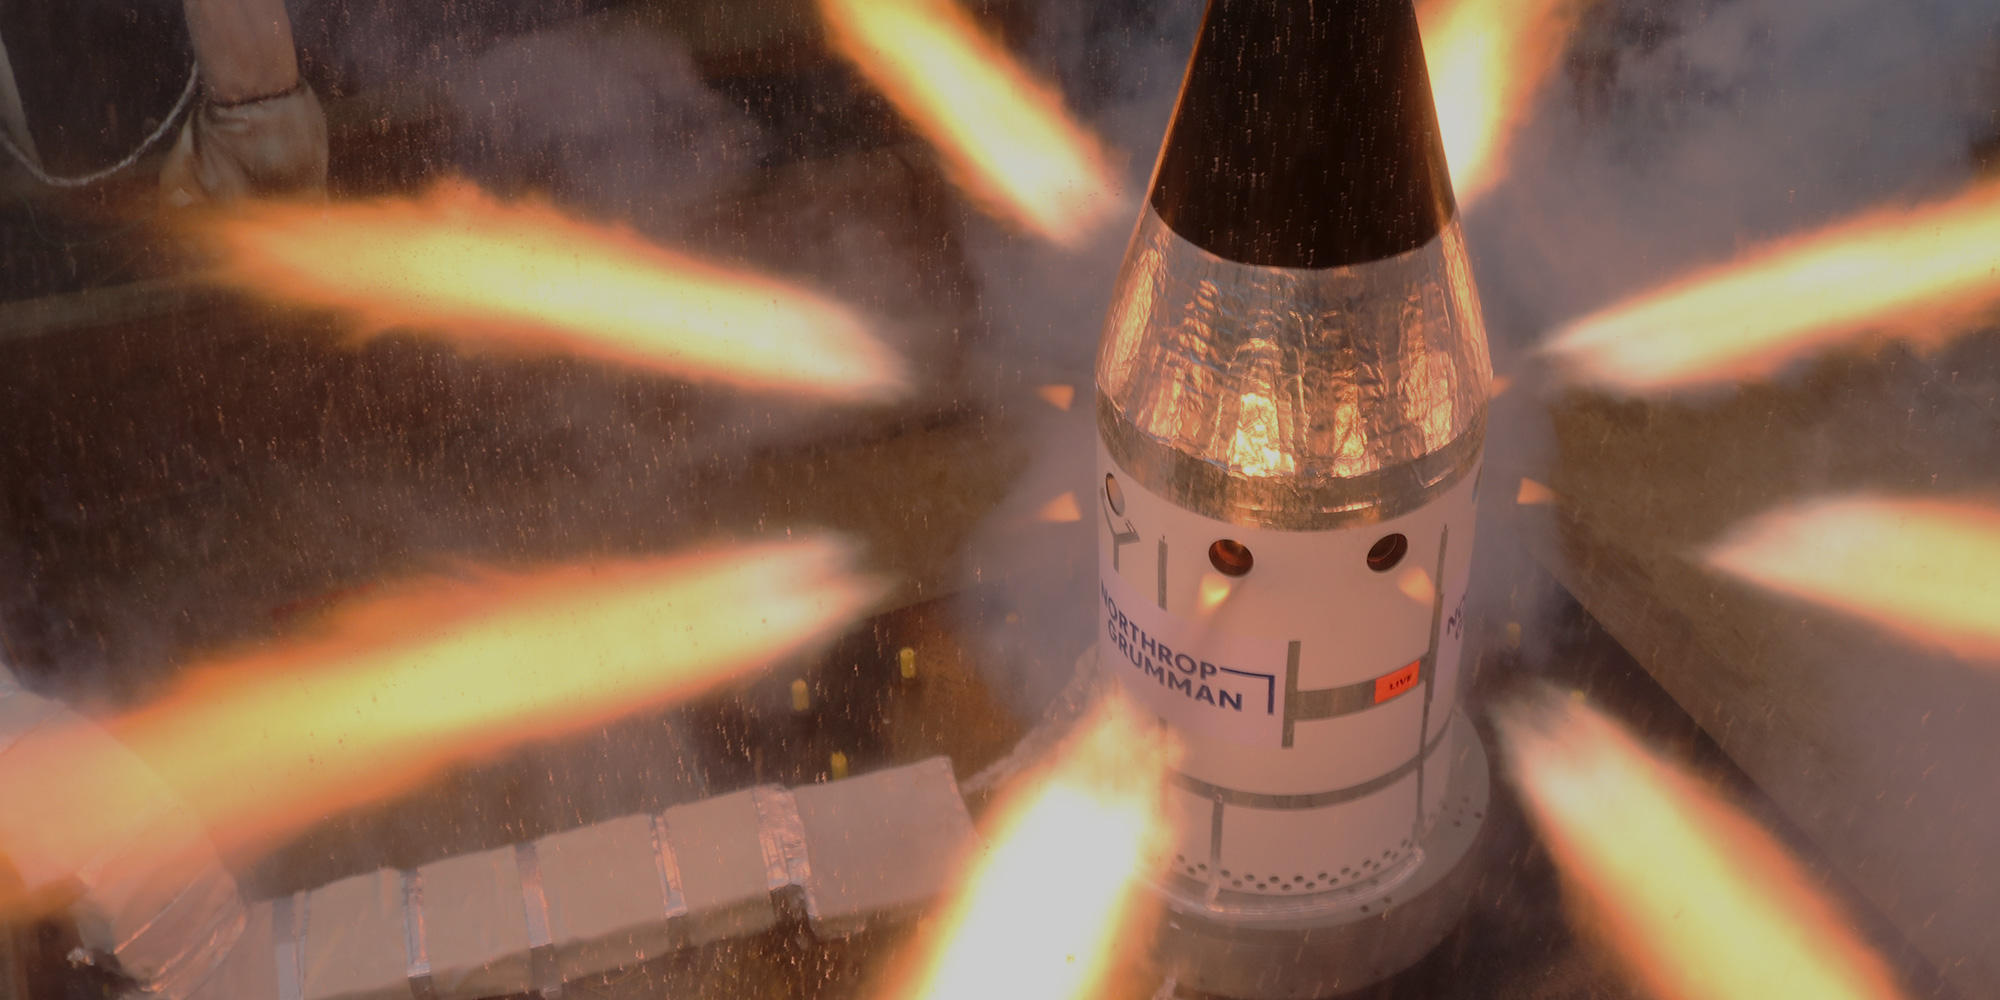 Rocket motor testing in action. Vertical capsule with flames shooting out of the sides.